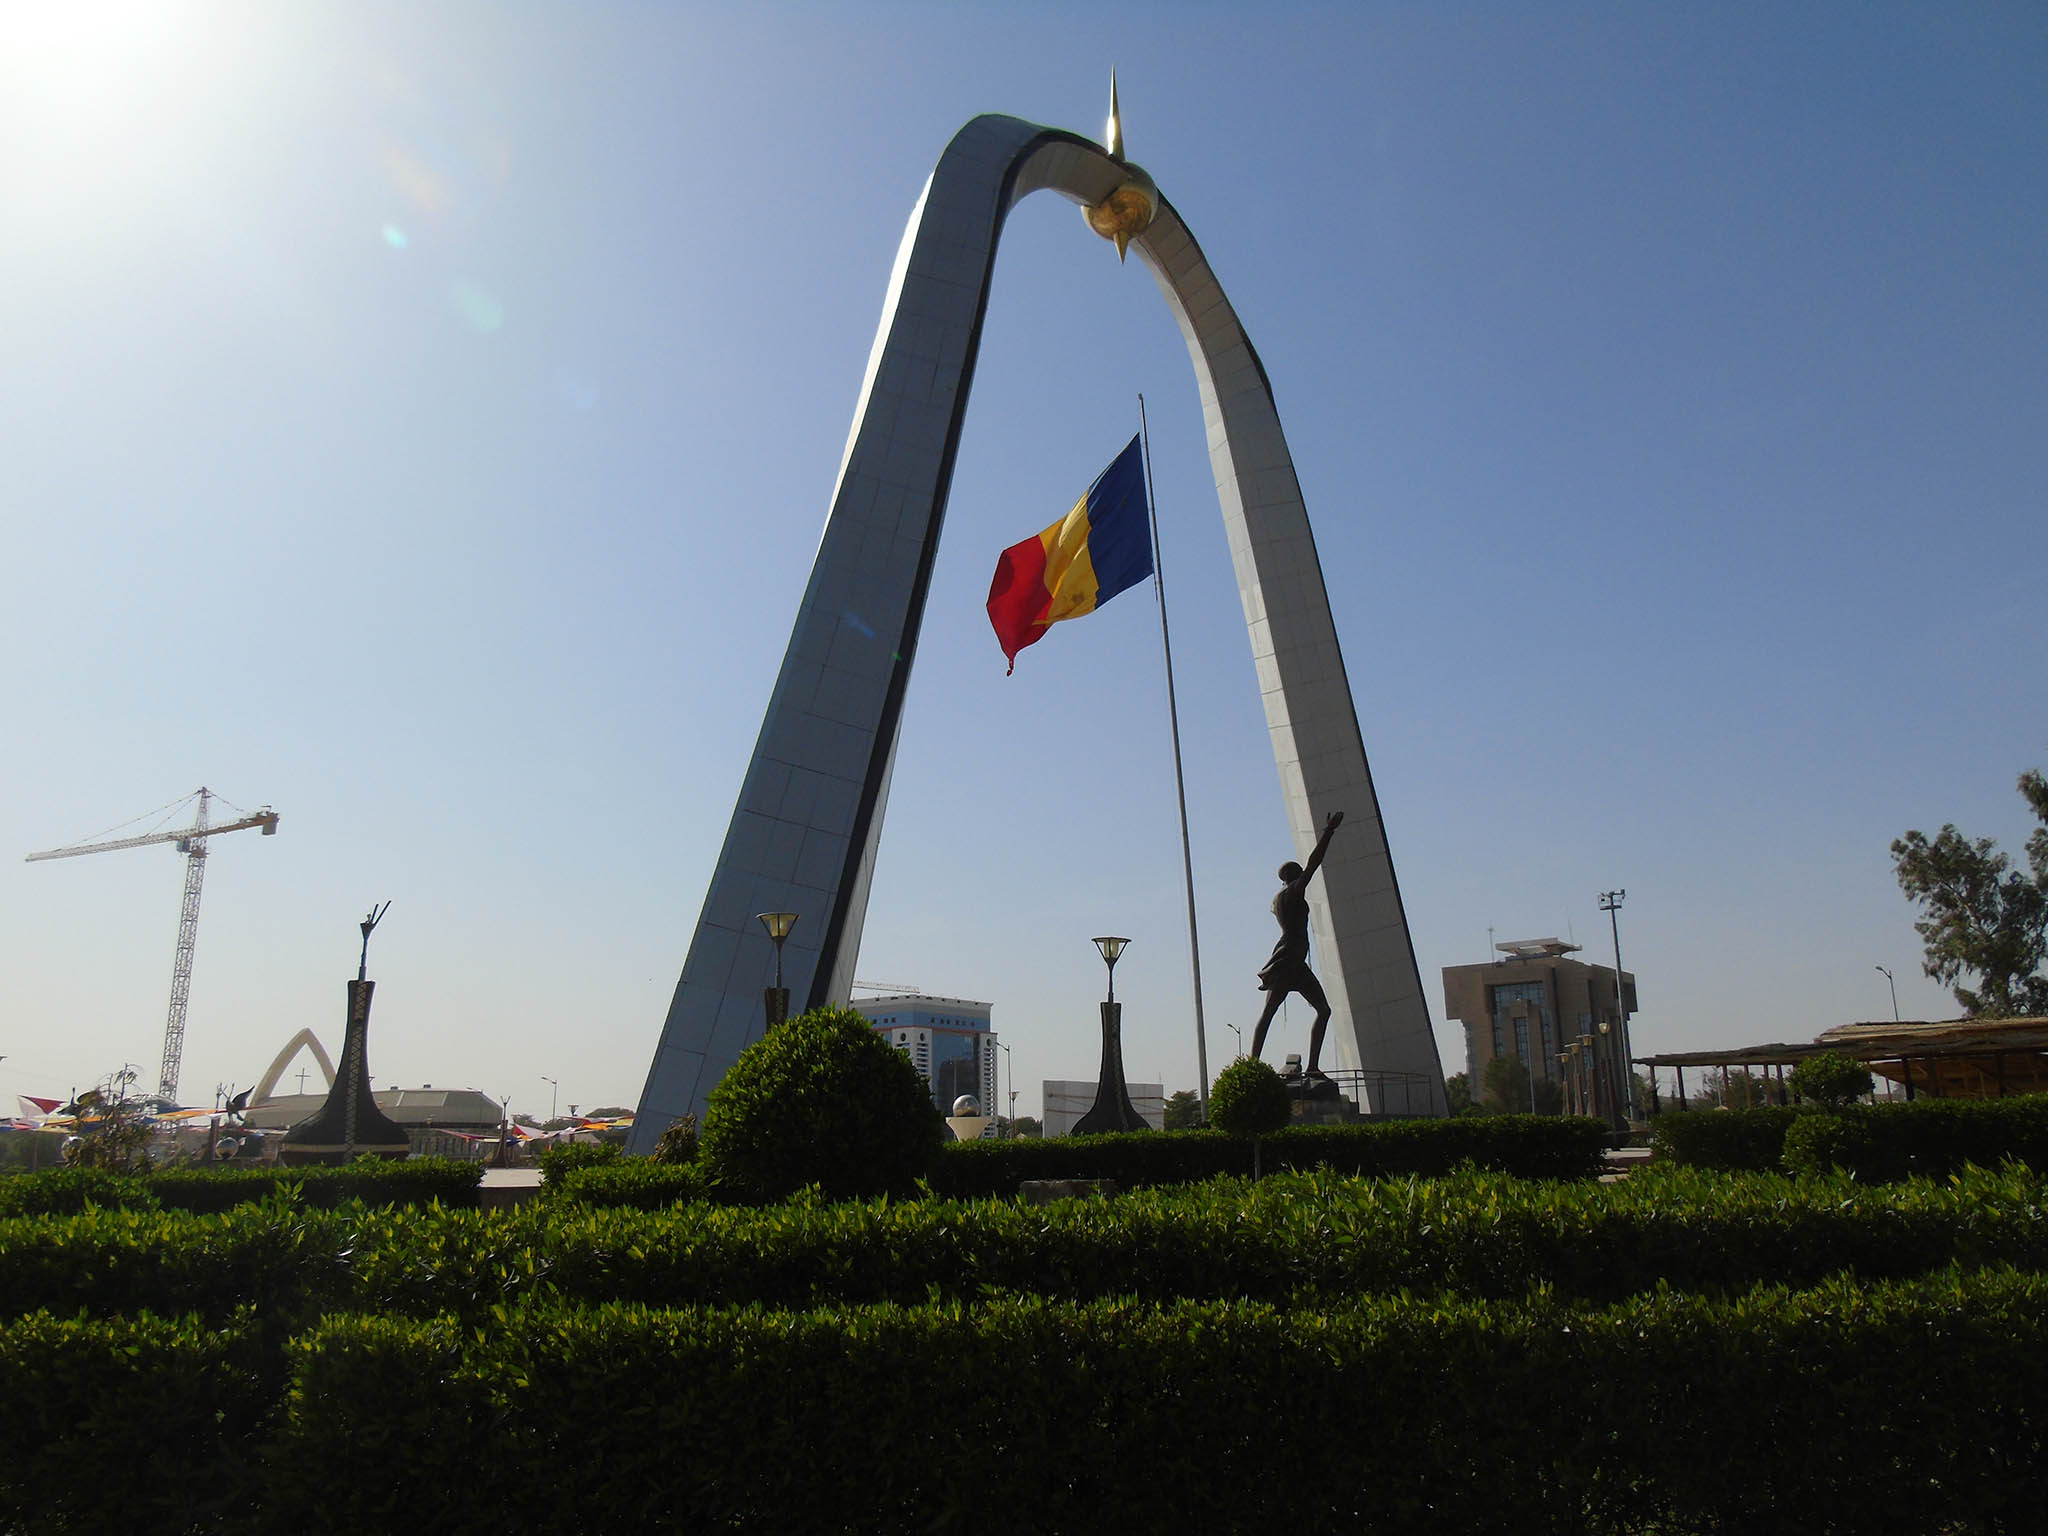 The “Place de la Nation” in the city of N'Djamena, the capital of Chad. December 23, 2018. (Yacoub/Wikimedia Commons)